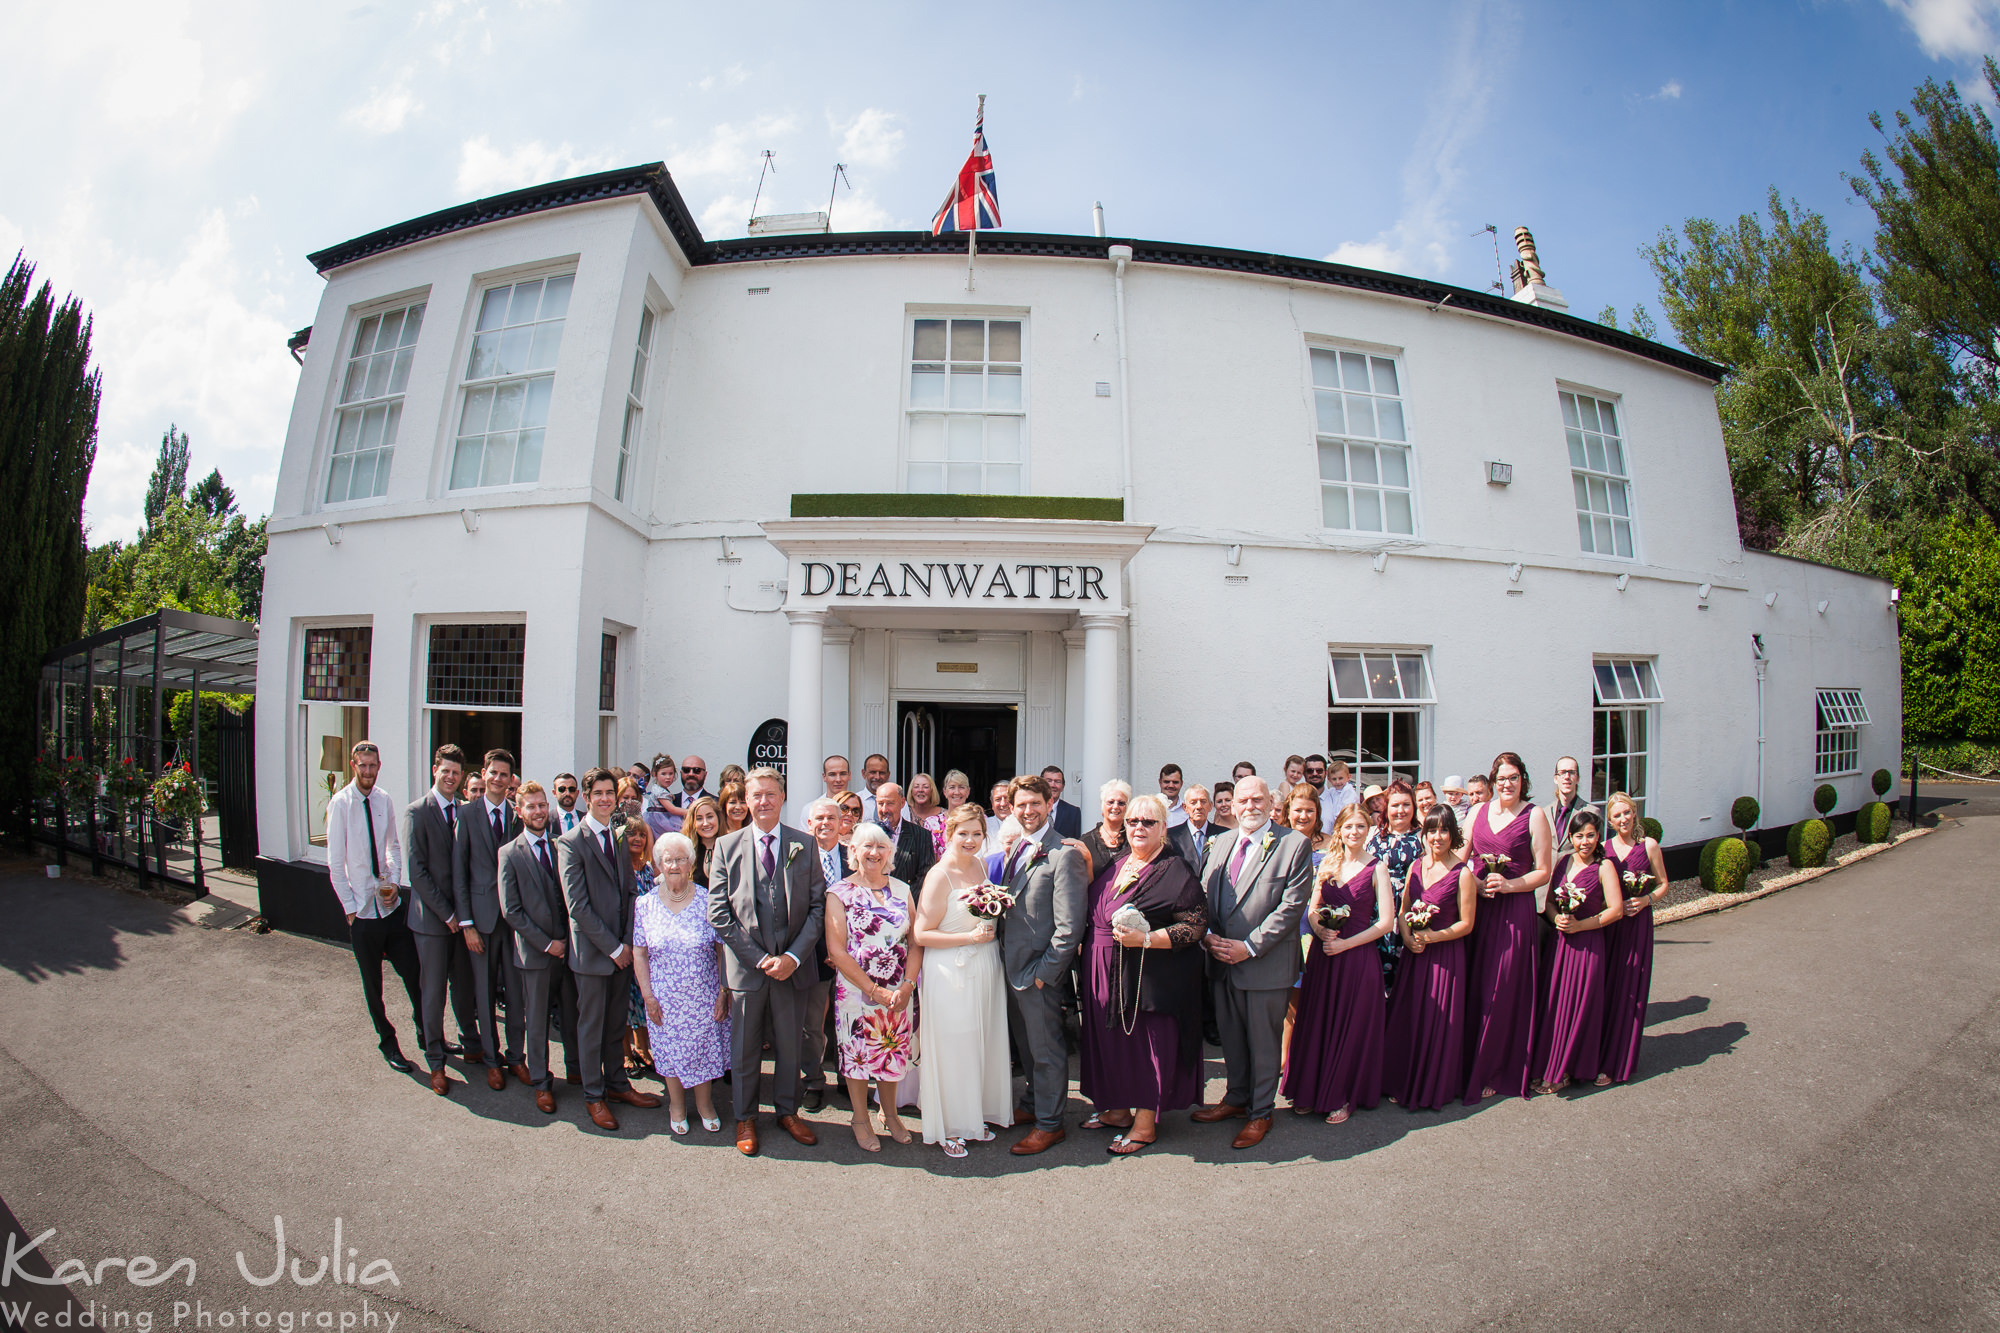 group photo of all guests outside the Deanwater Hotel